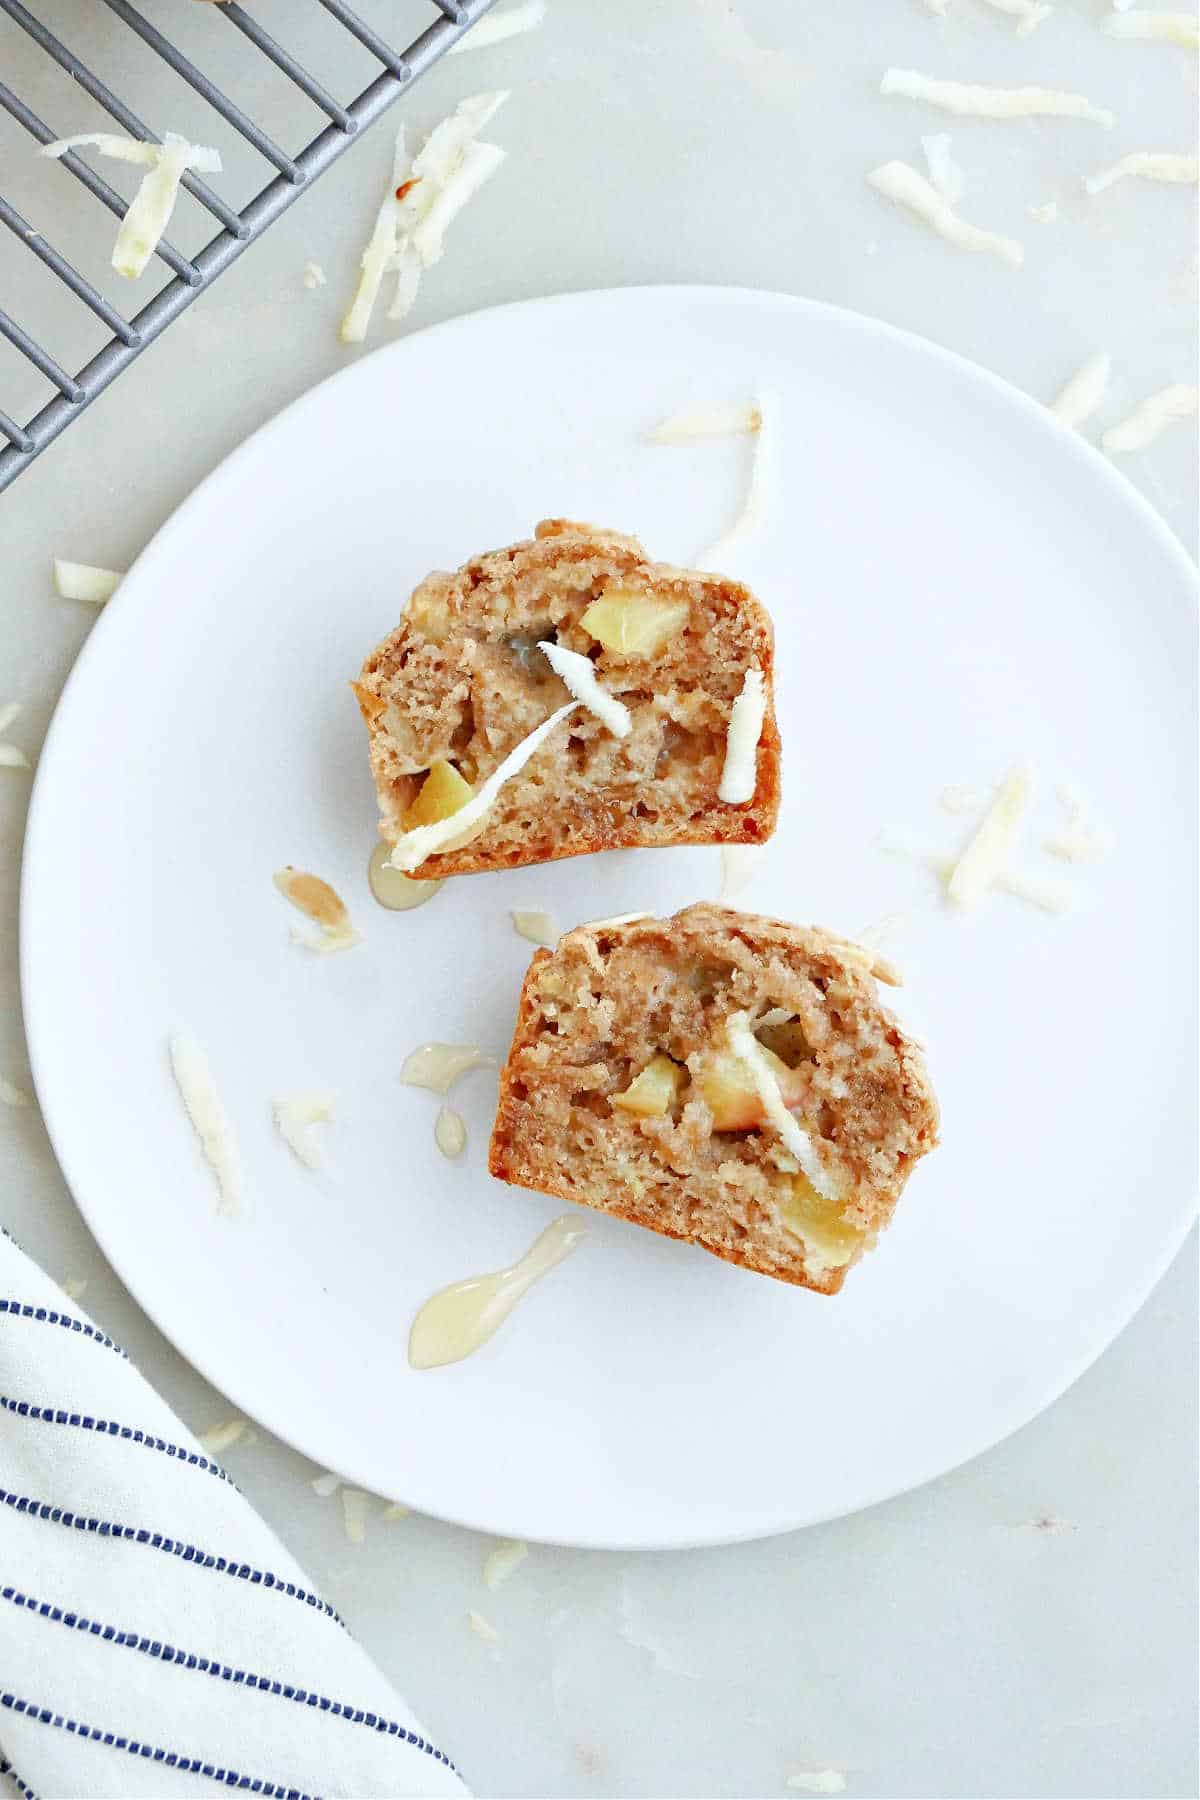 one apple parsnip muffin sliced in half and drizzled with honey on a serving plate